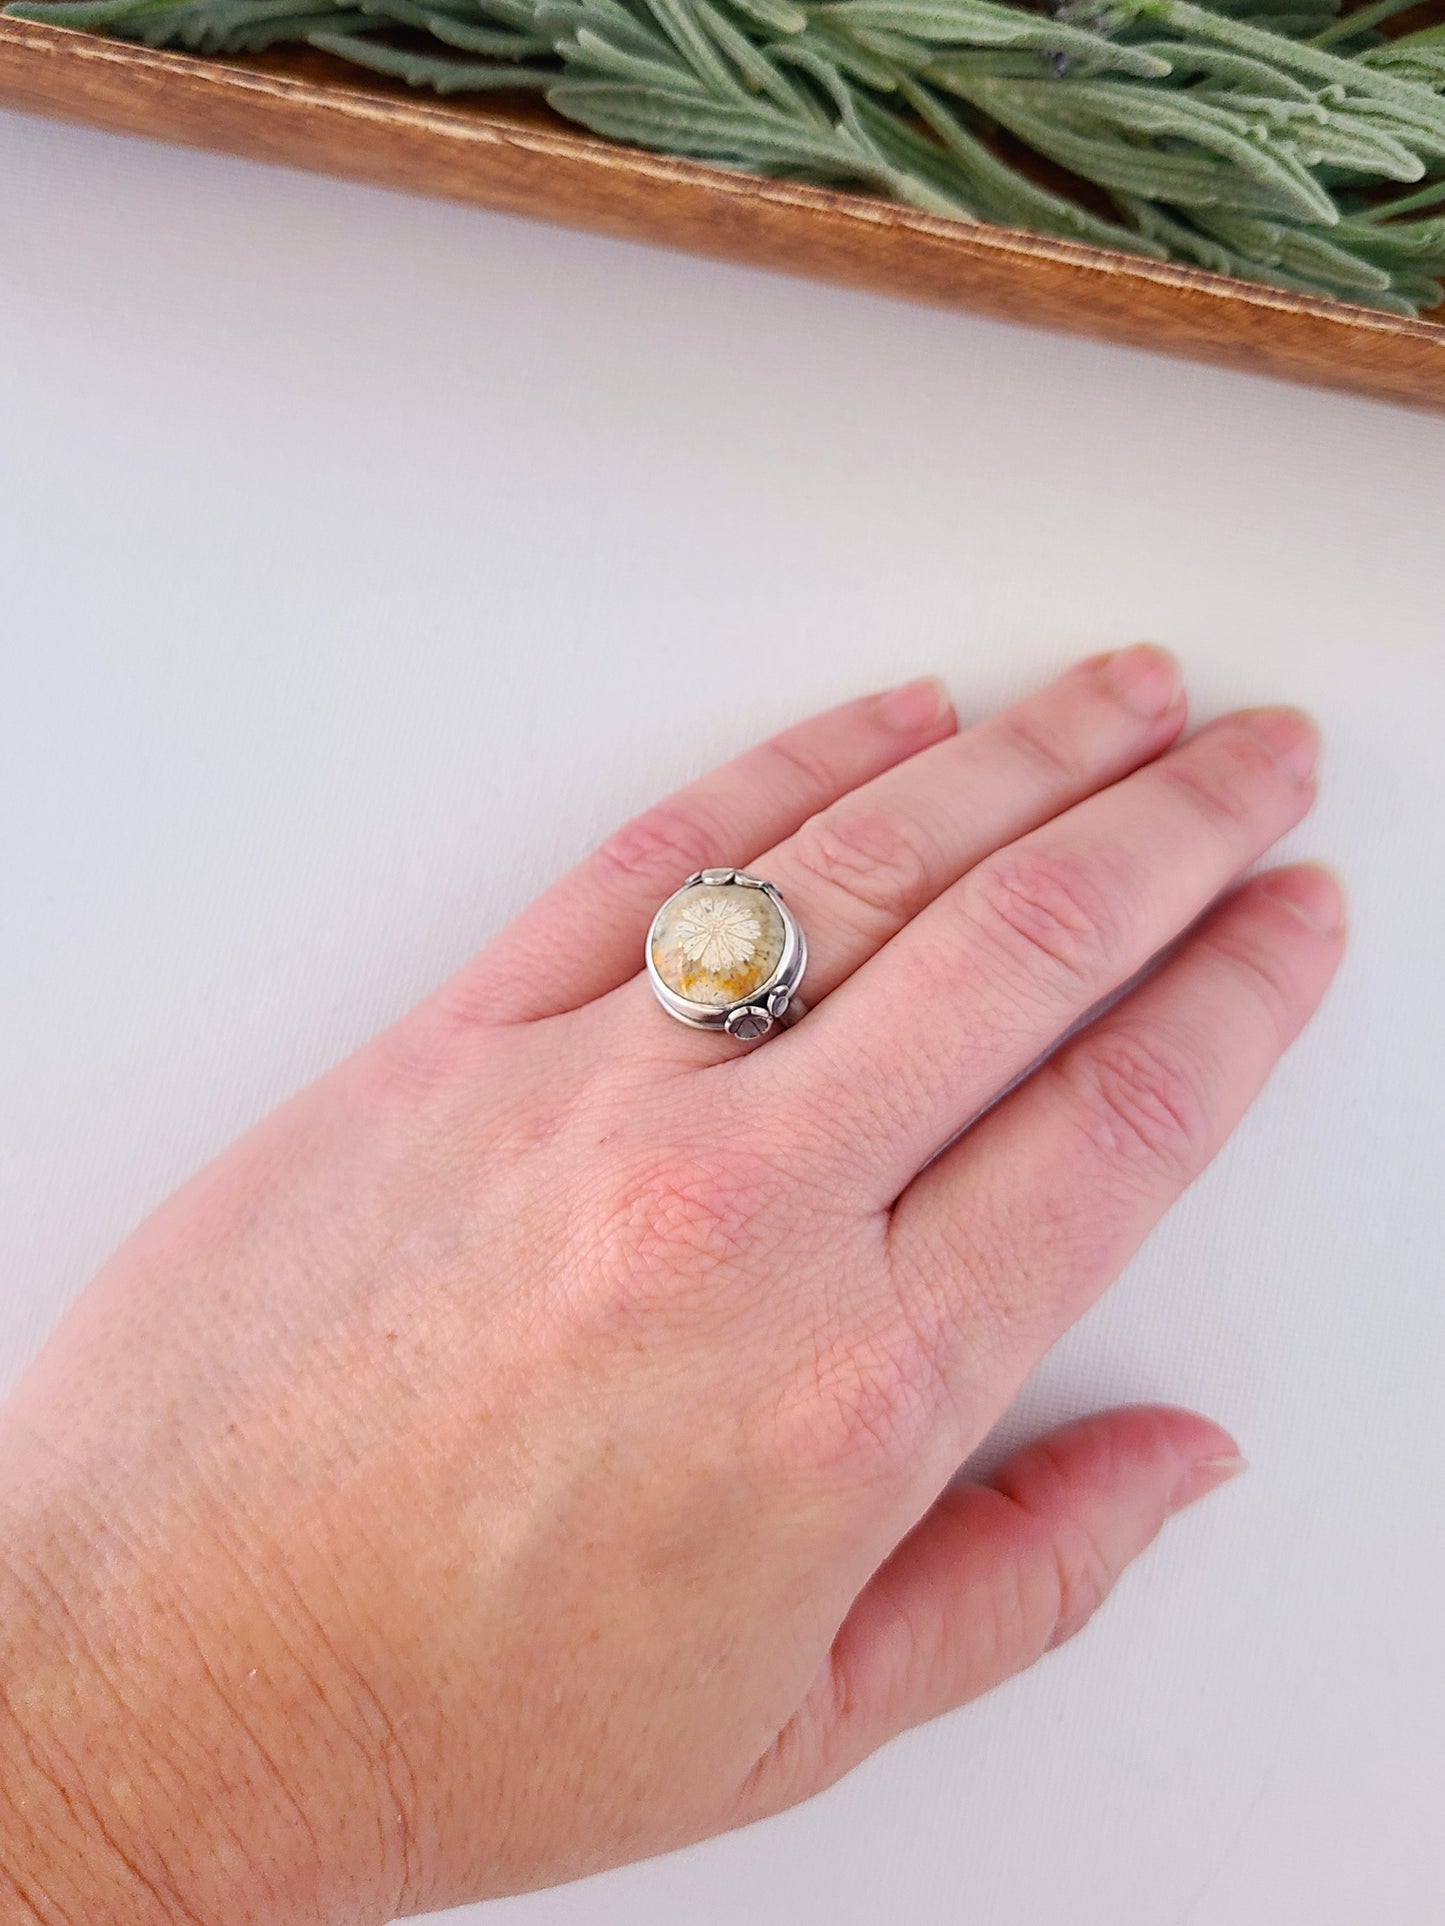 Bouquet ring #4 size 7.25 US